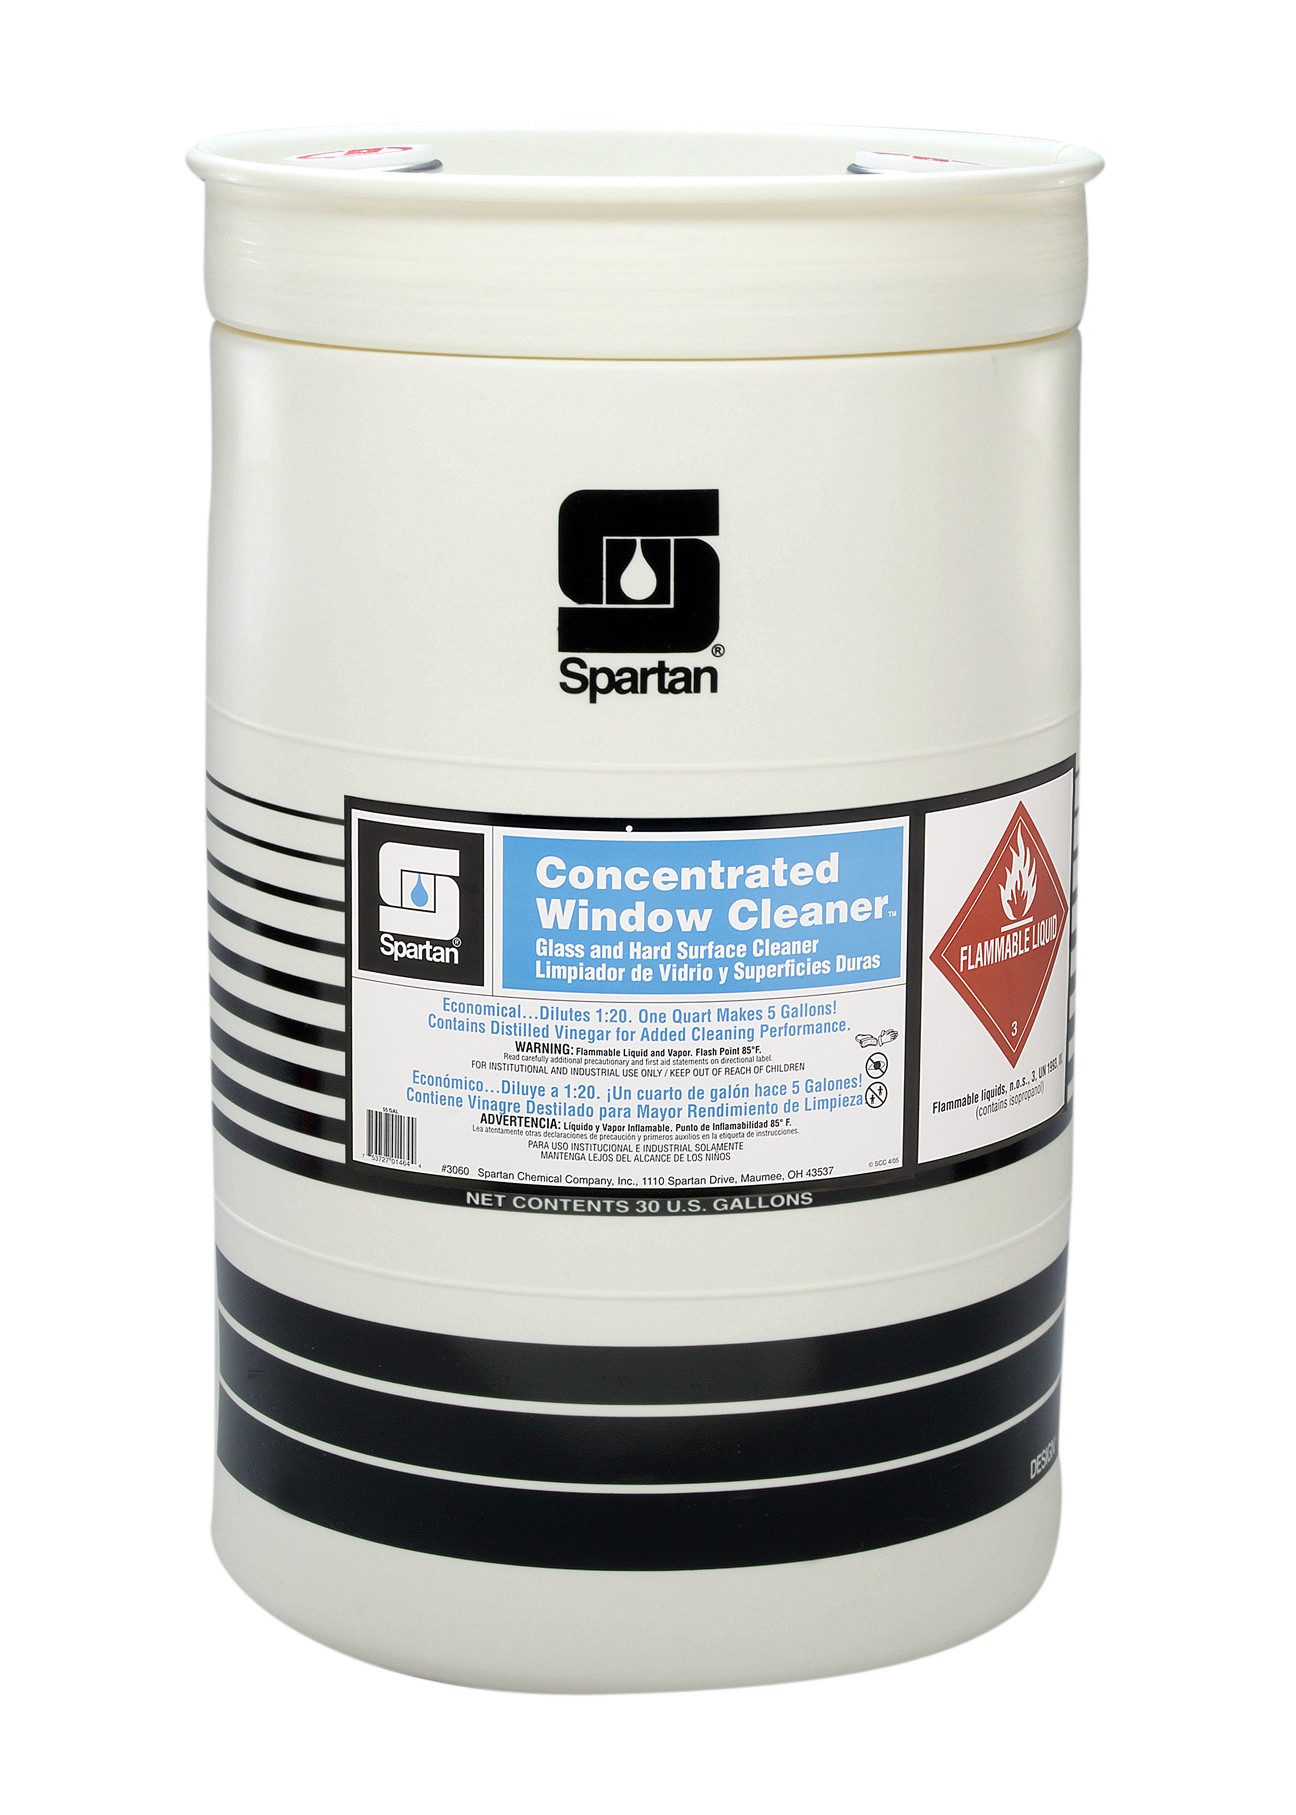 Spartan Chemical Company Concentrated Window Cleaner, 30 GAL DRUM